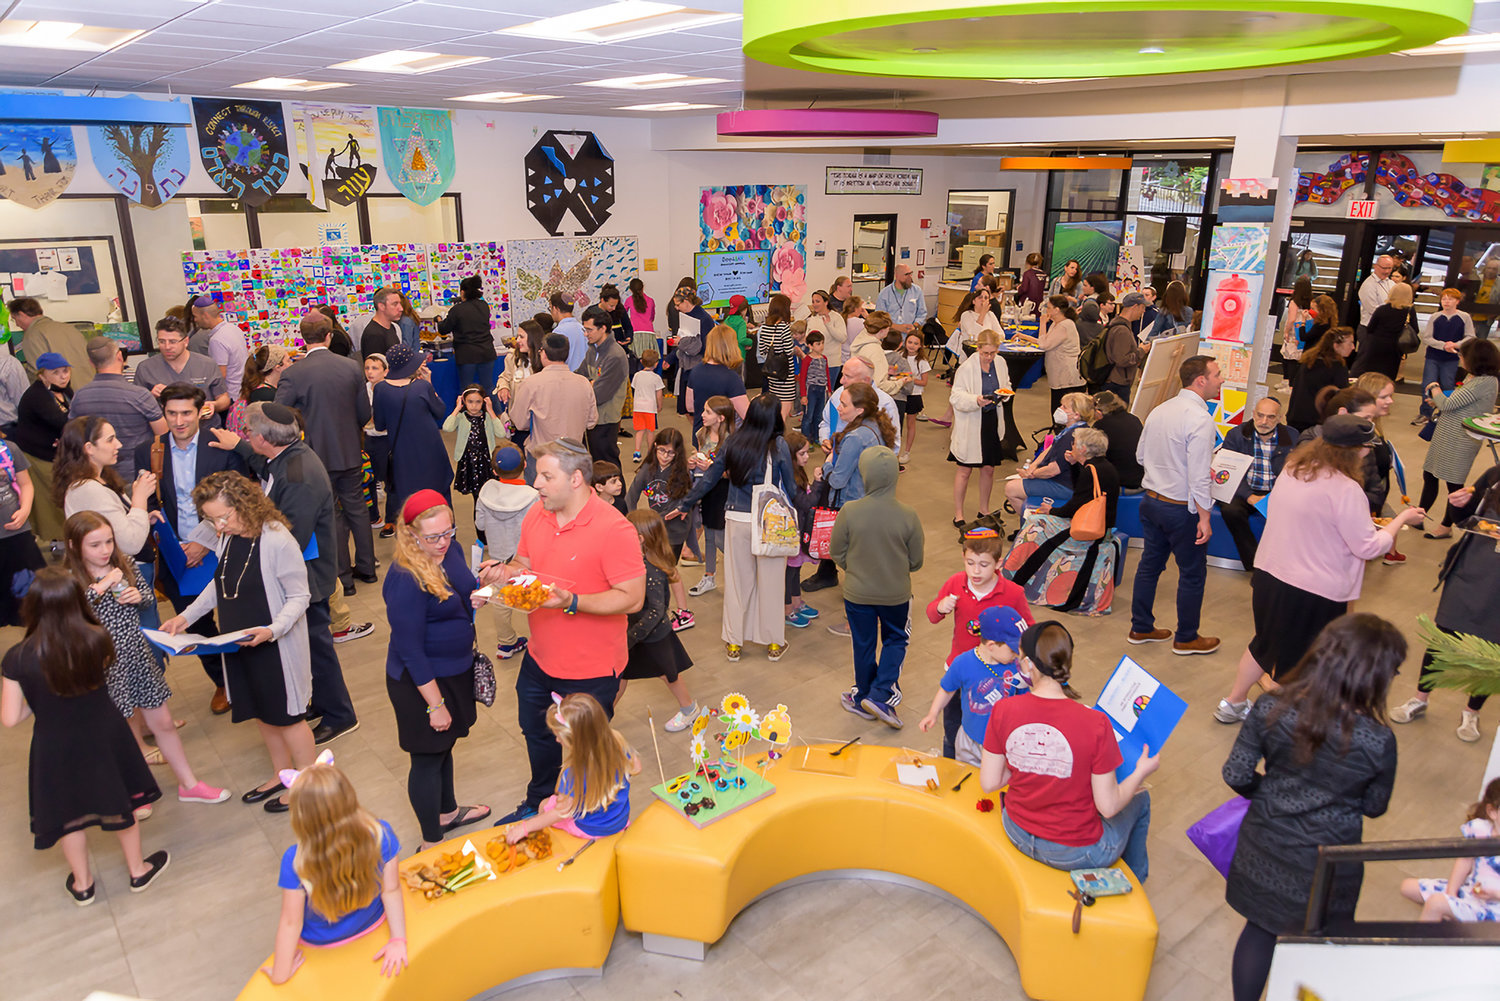 SAR Academy students, parents and faculty attend the school's recent art exhibit at Harvest & Bloom.